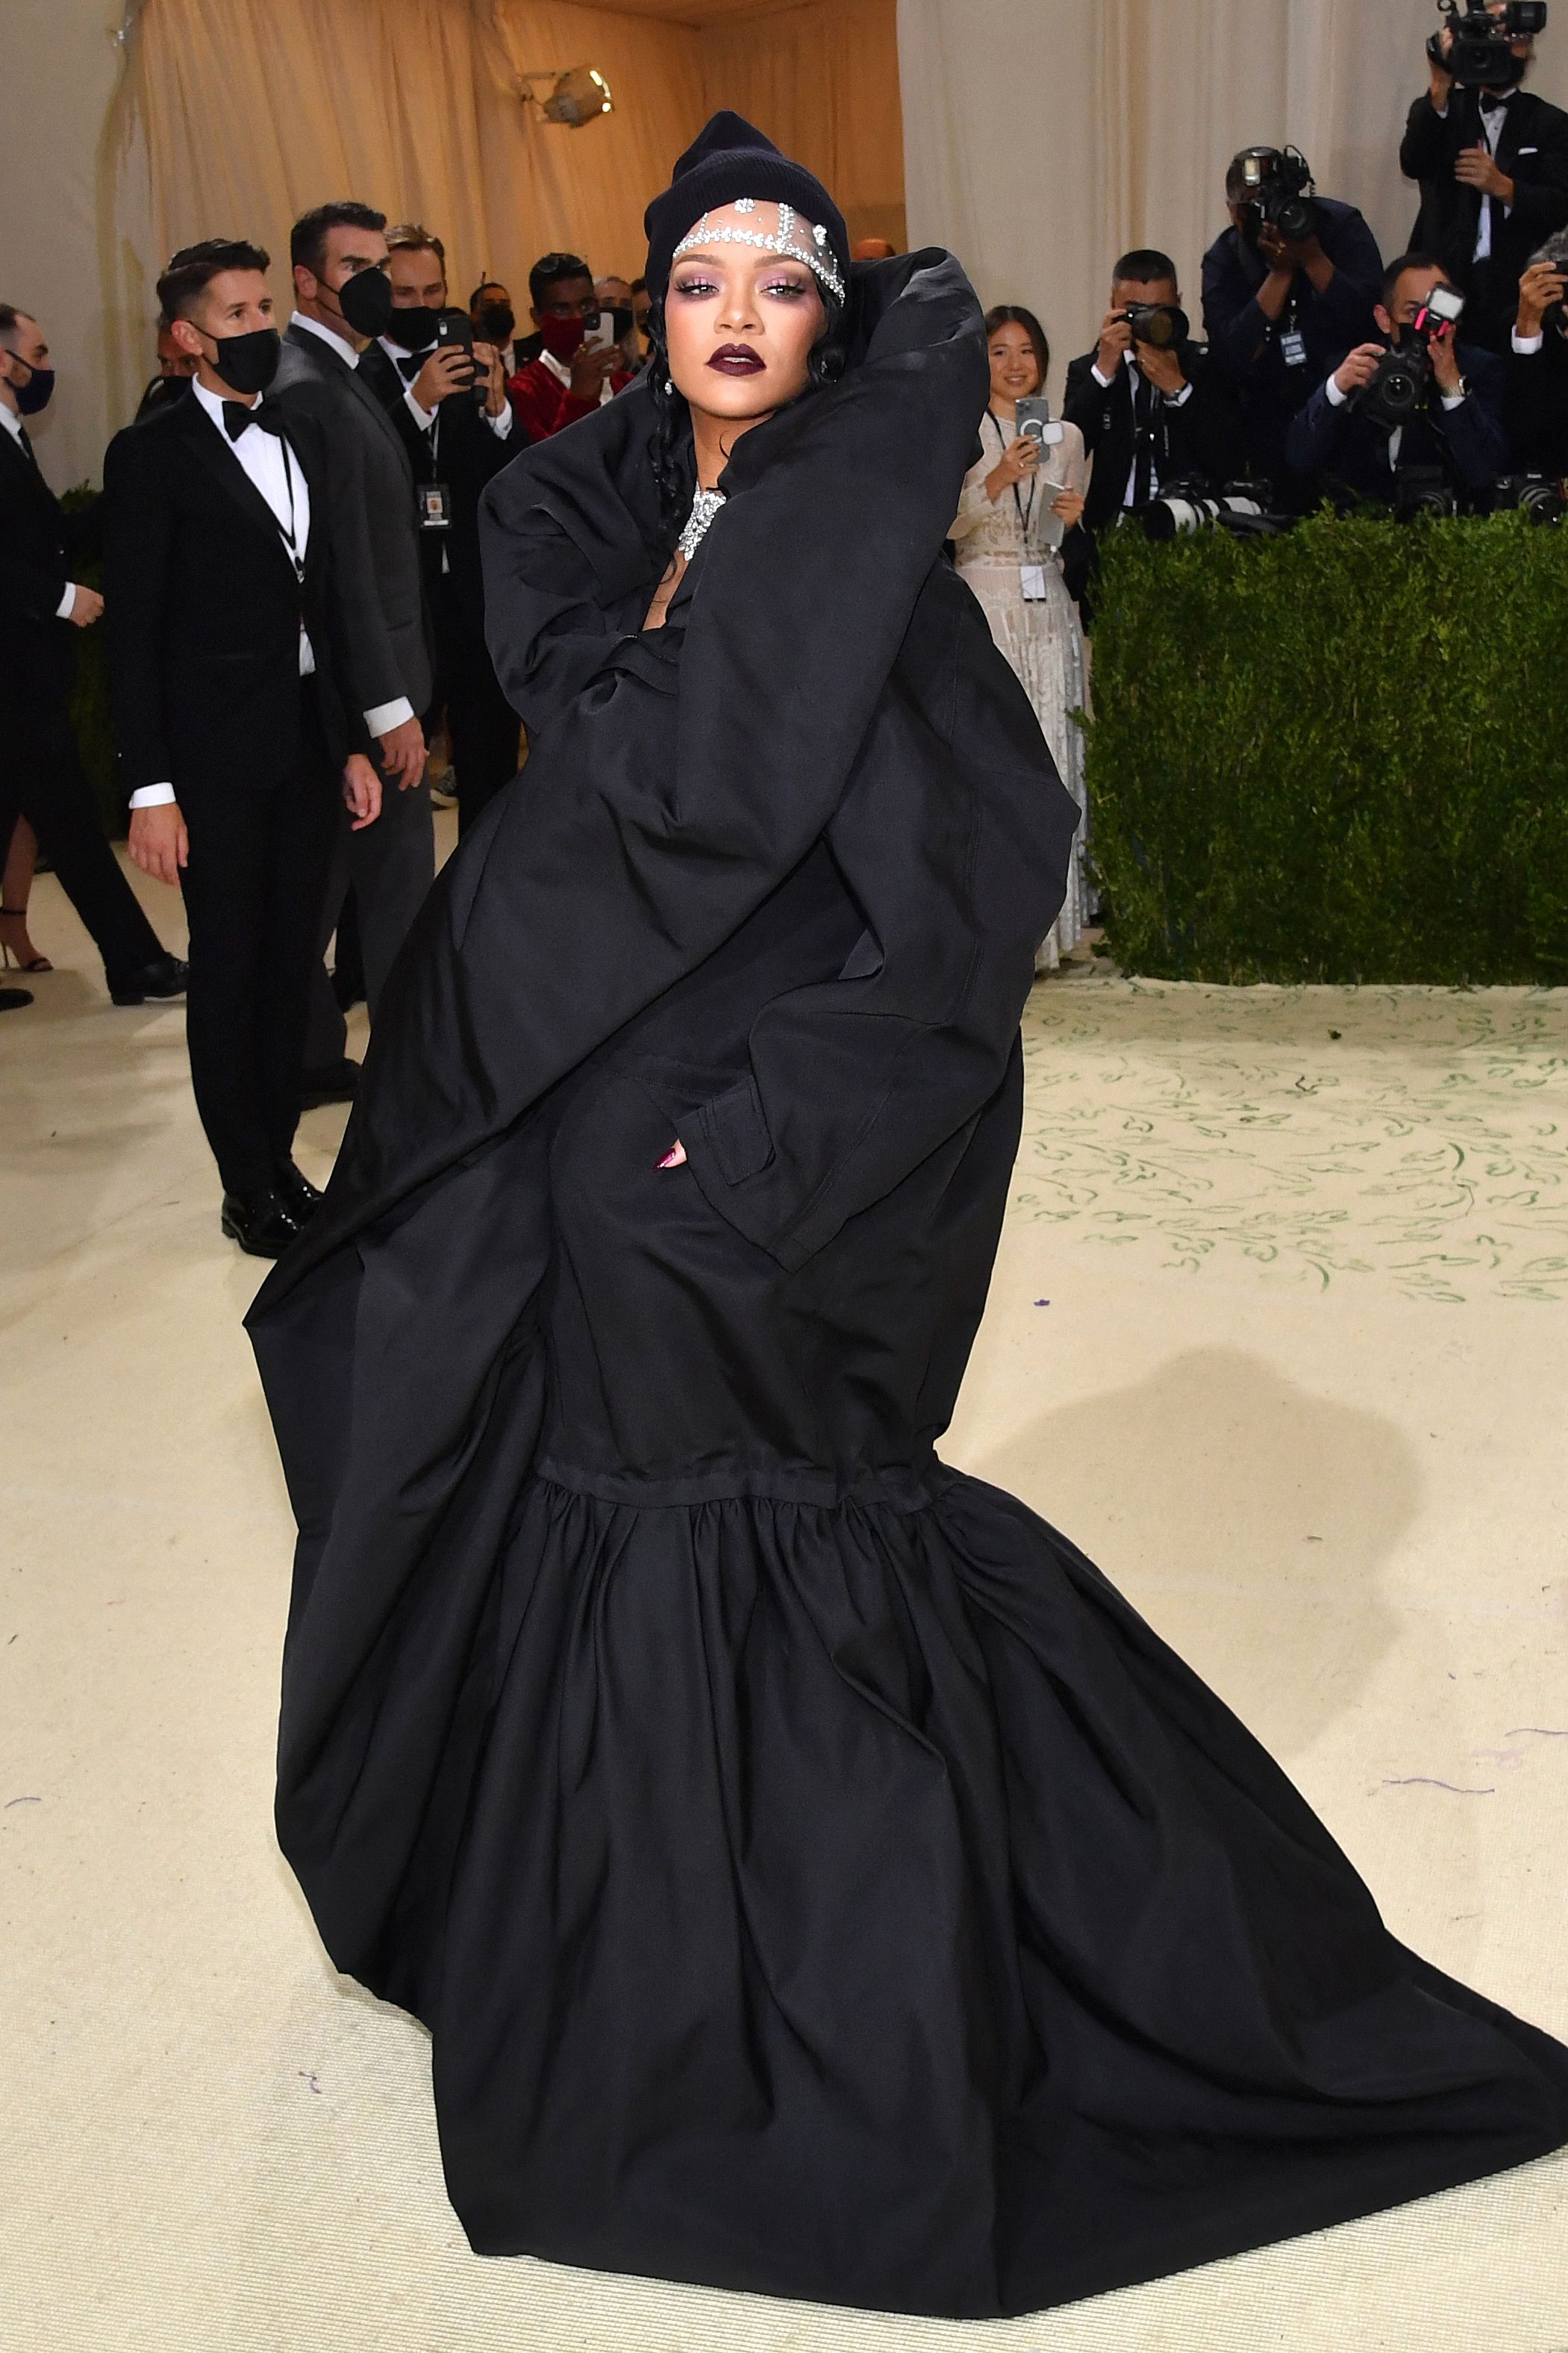 The Best Looks From the 2021 Met Gala - Fashionista